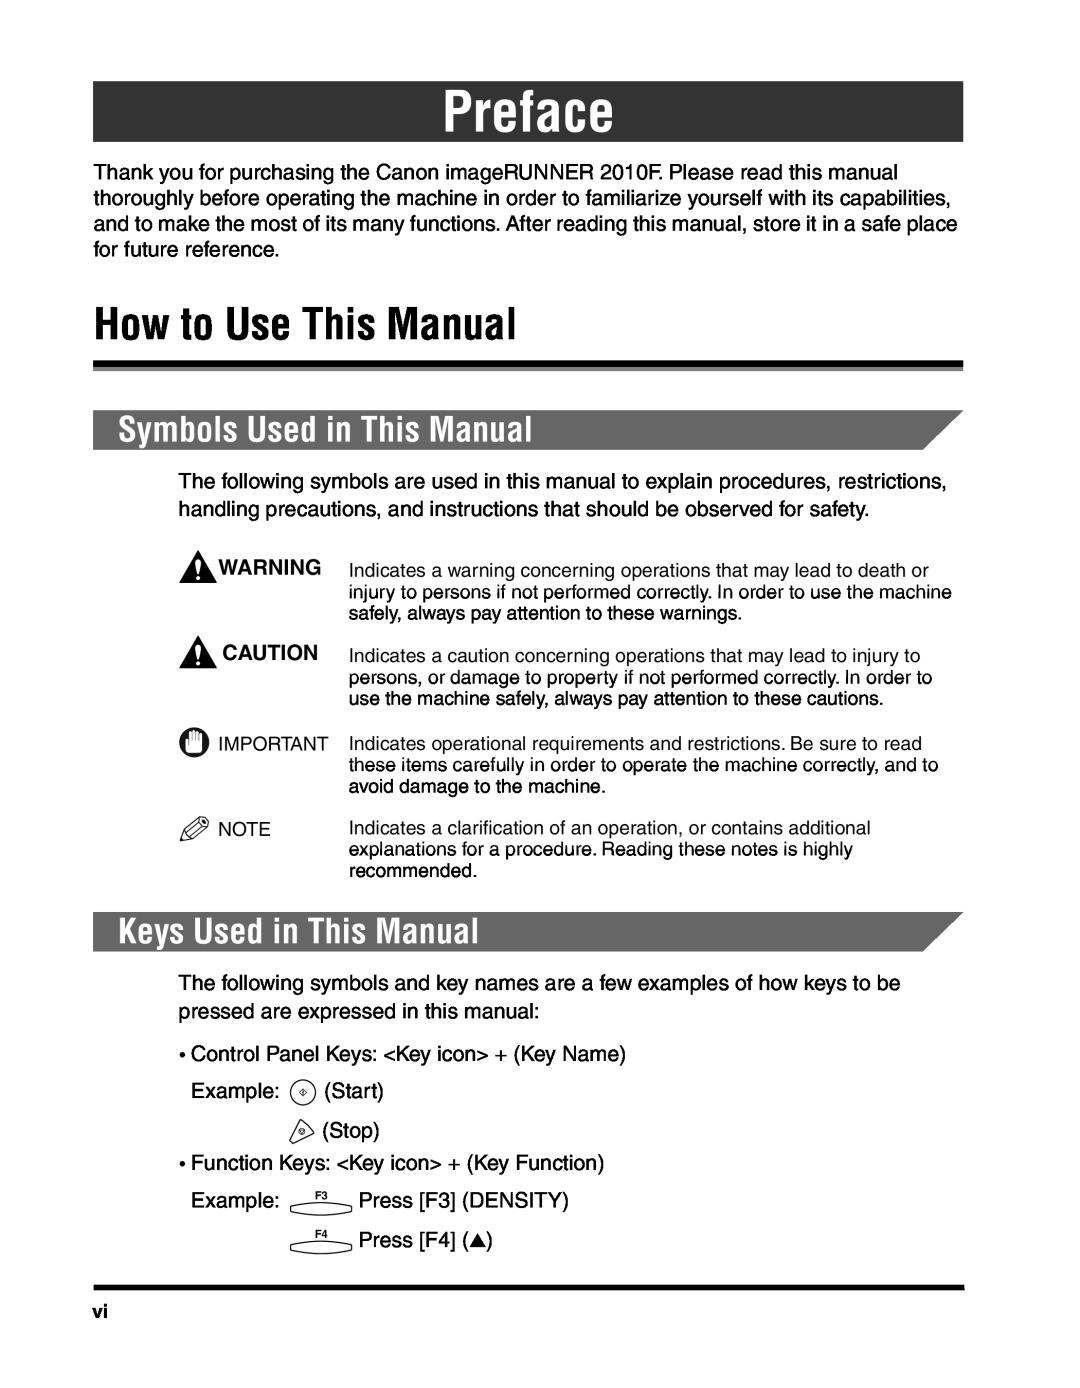 Canon 2010F manual How to Use This Manual, Symbols Used in This Manual, Keys Used in This Manual, Preface 